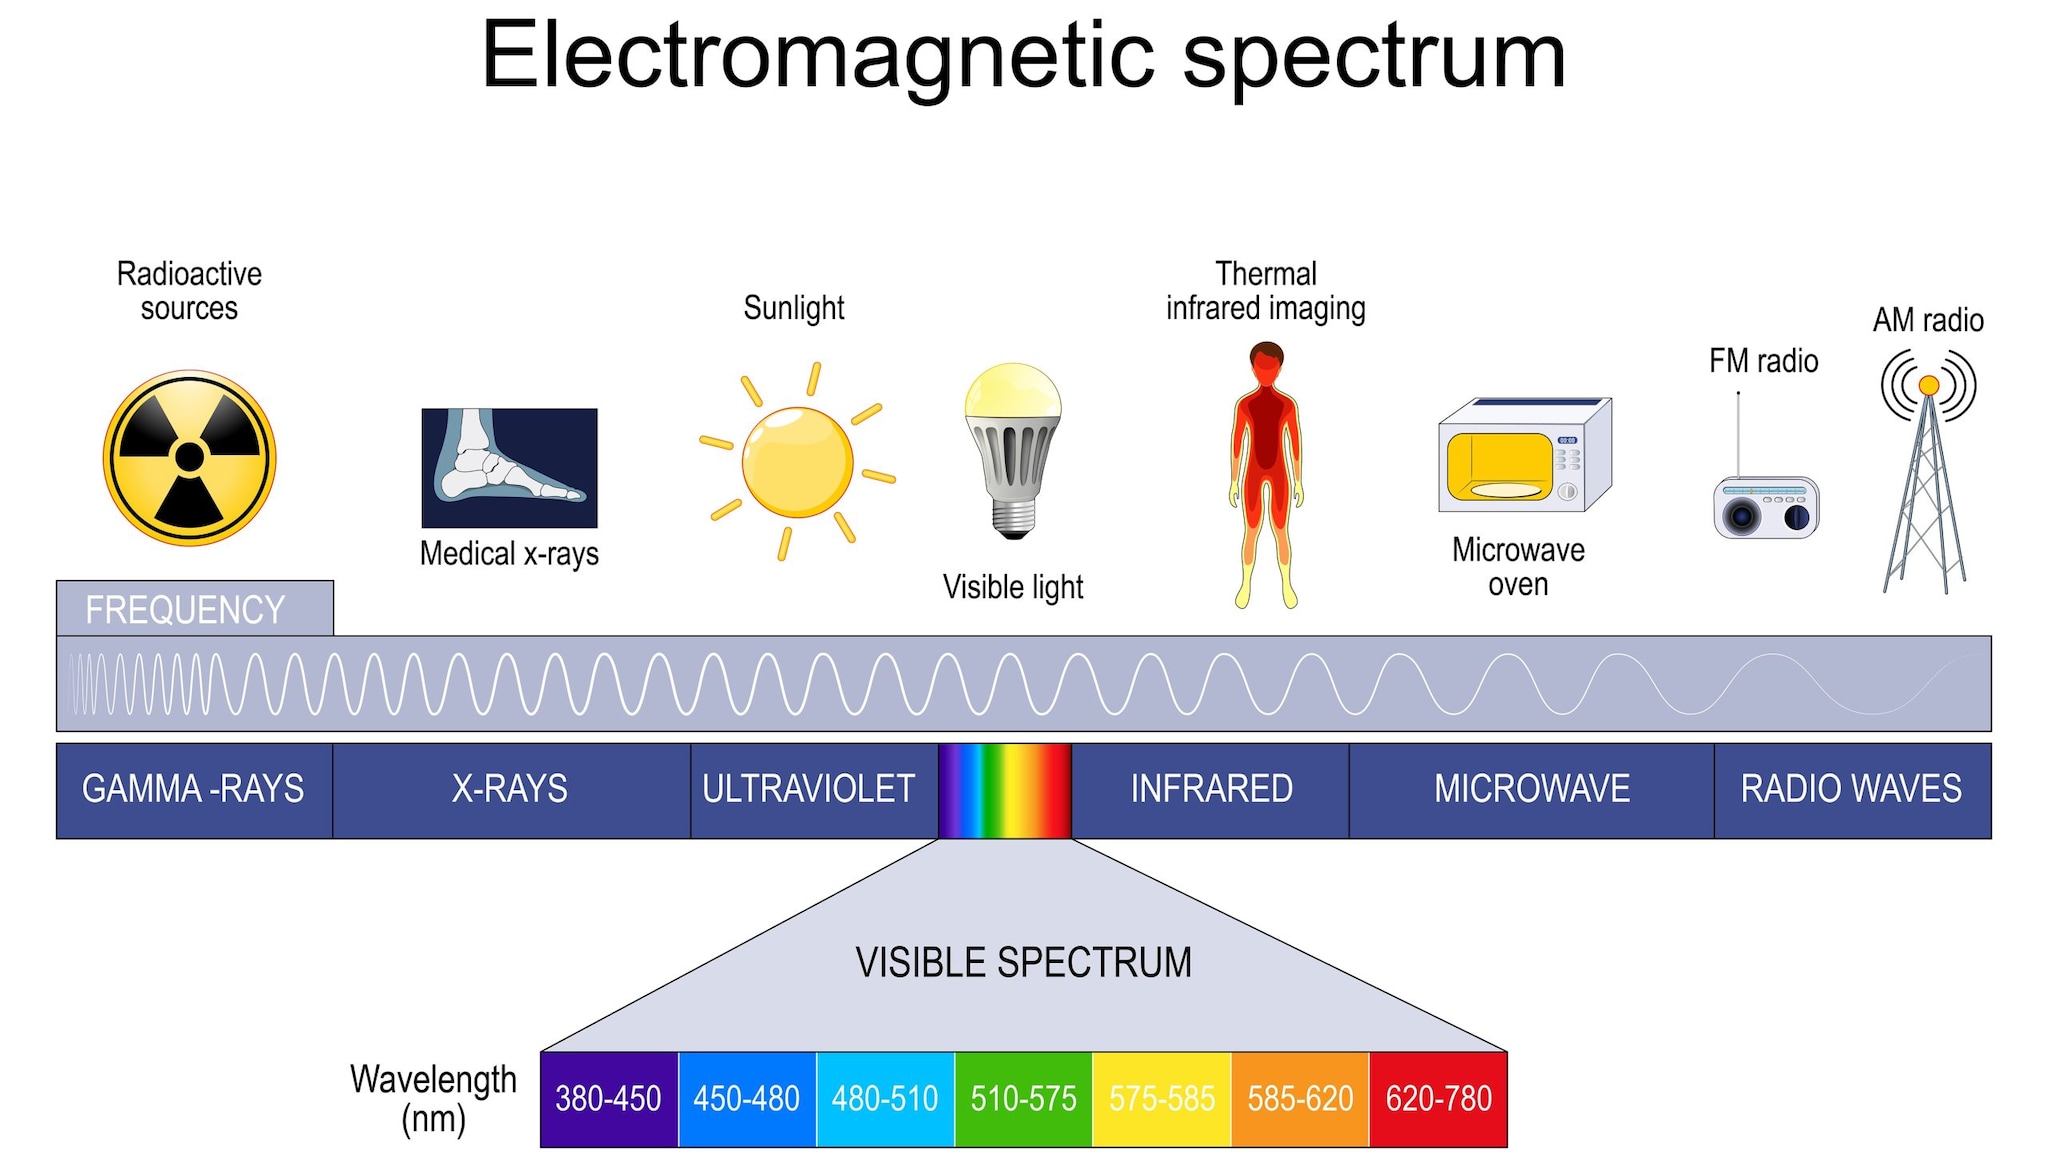 Electromagnetic spectrum. Different types of electromagnetic radiation, includes radio waves, microwaves, infrared, visible light, ultraviolet, X-rays, and gamma rays. frequency, and wavelengths.